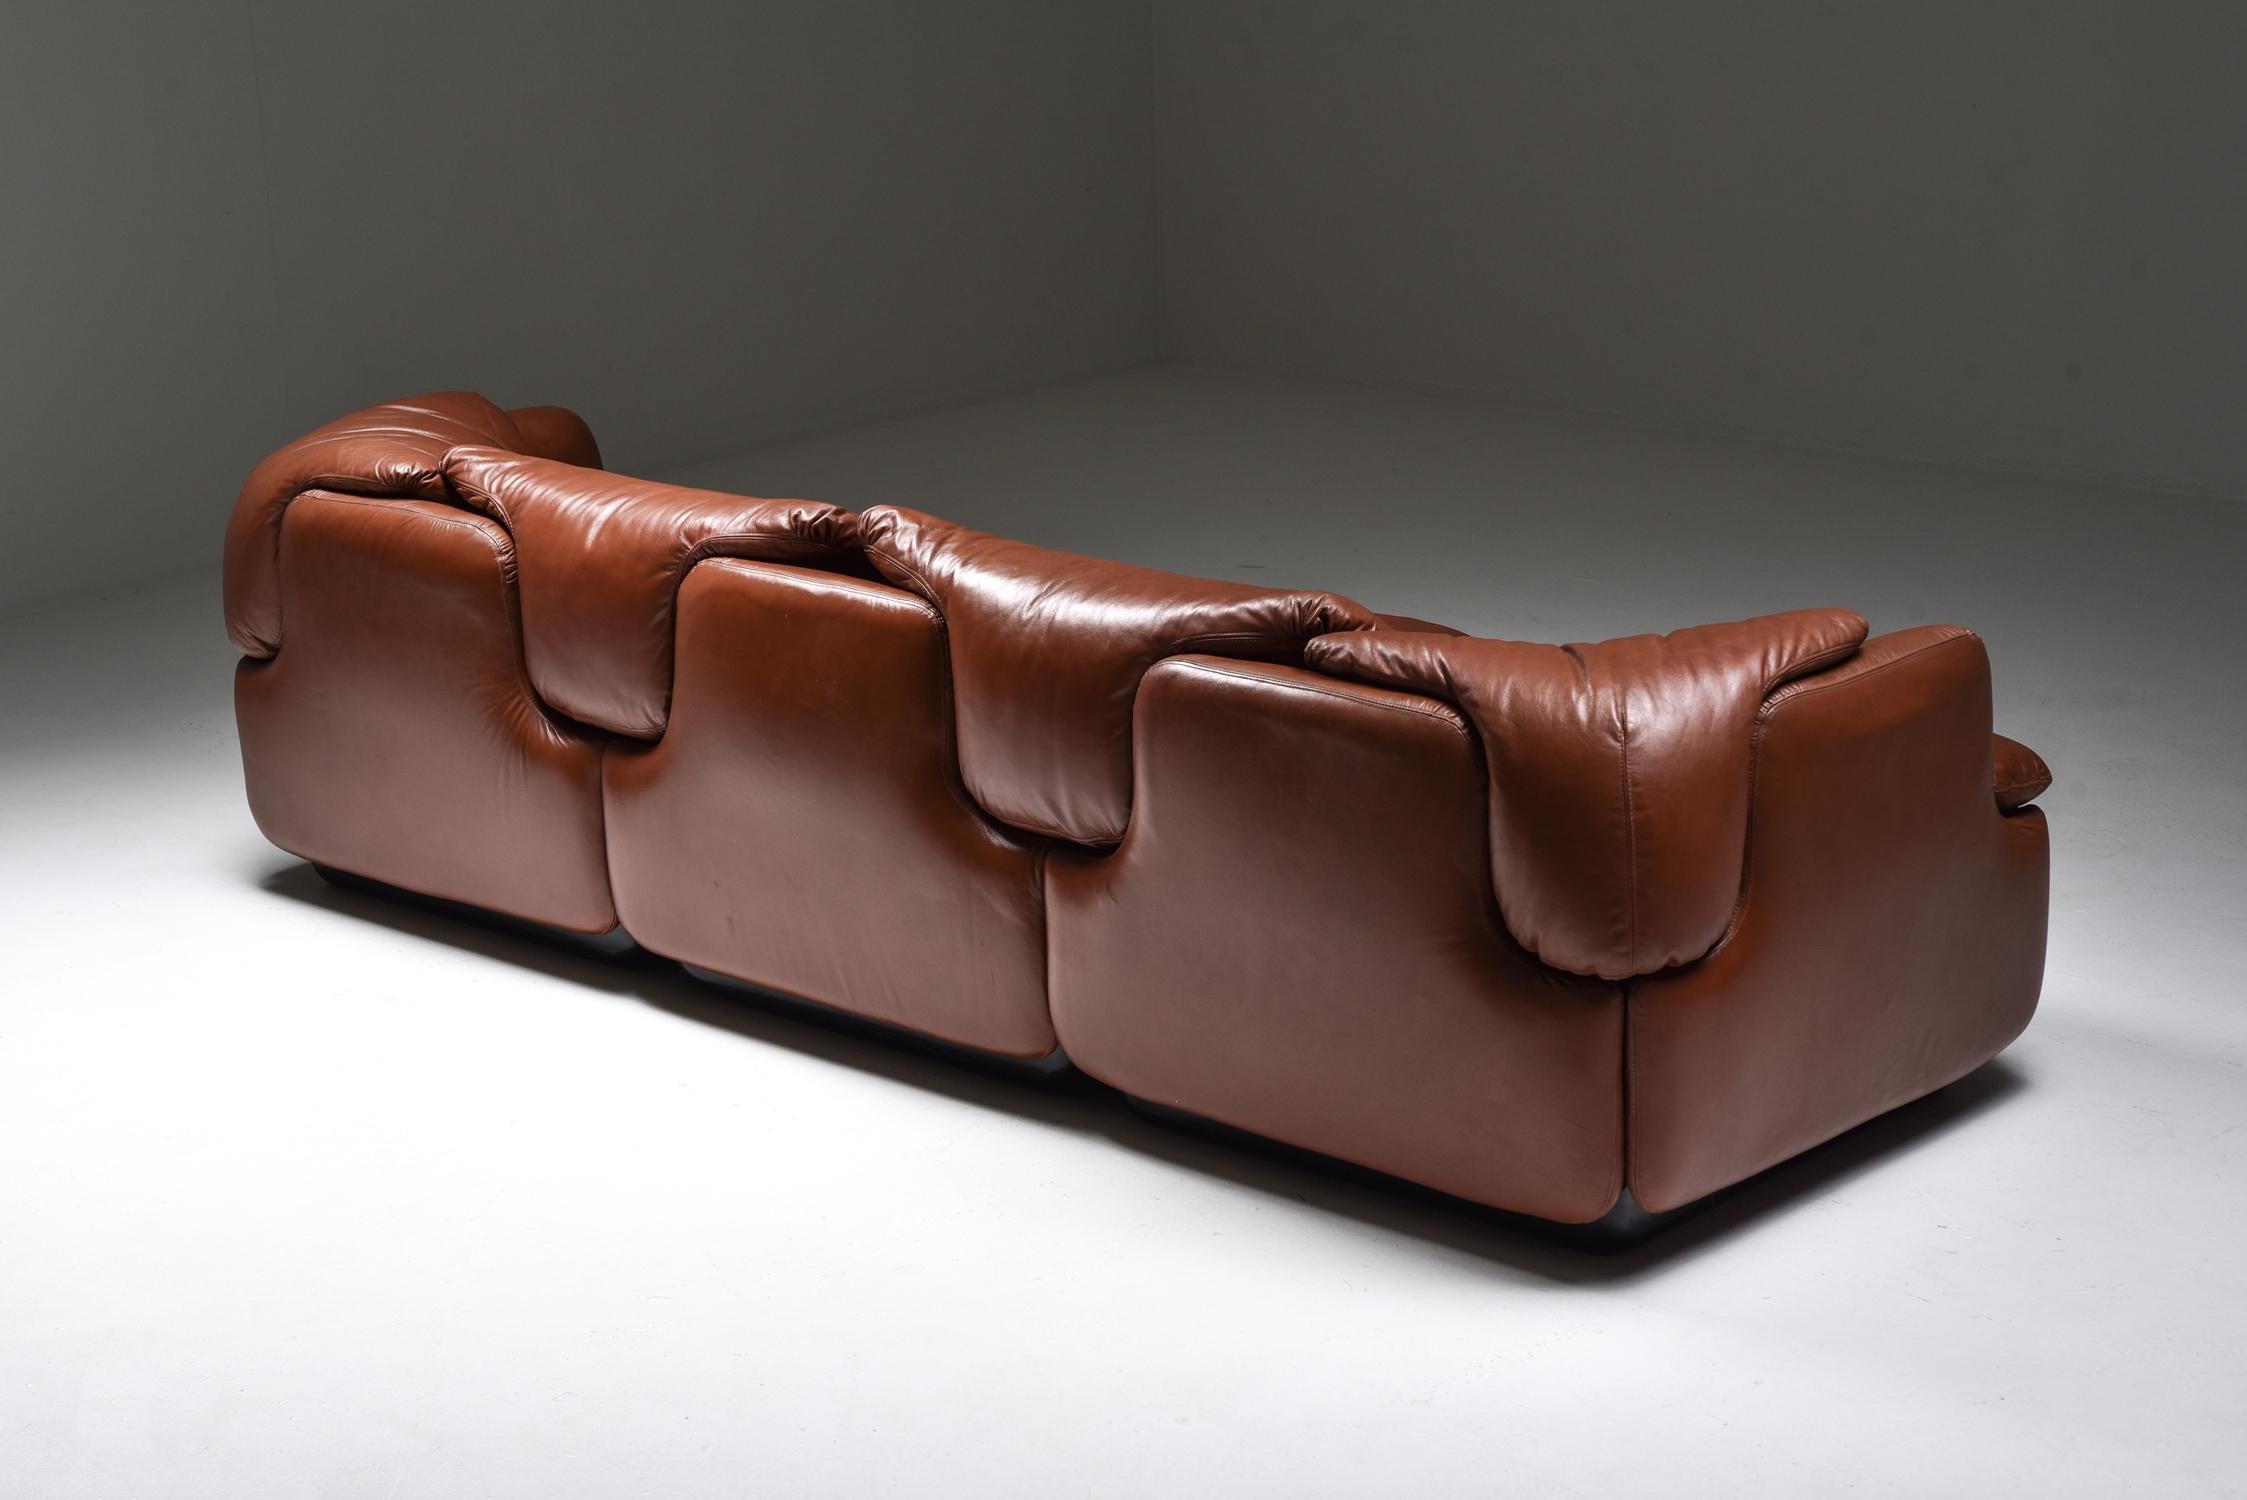 Postmodern 'confidential' three-seat sofa in high quality nappa leather, designed by Italian architect Alberto Rosselli in 1972 for Saporiti Italia.
Especially the design of the back of this spectacular sofa makes it stand out from any